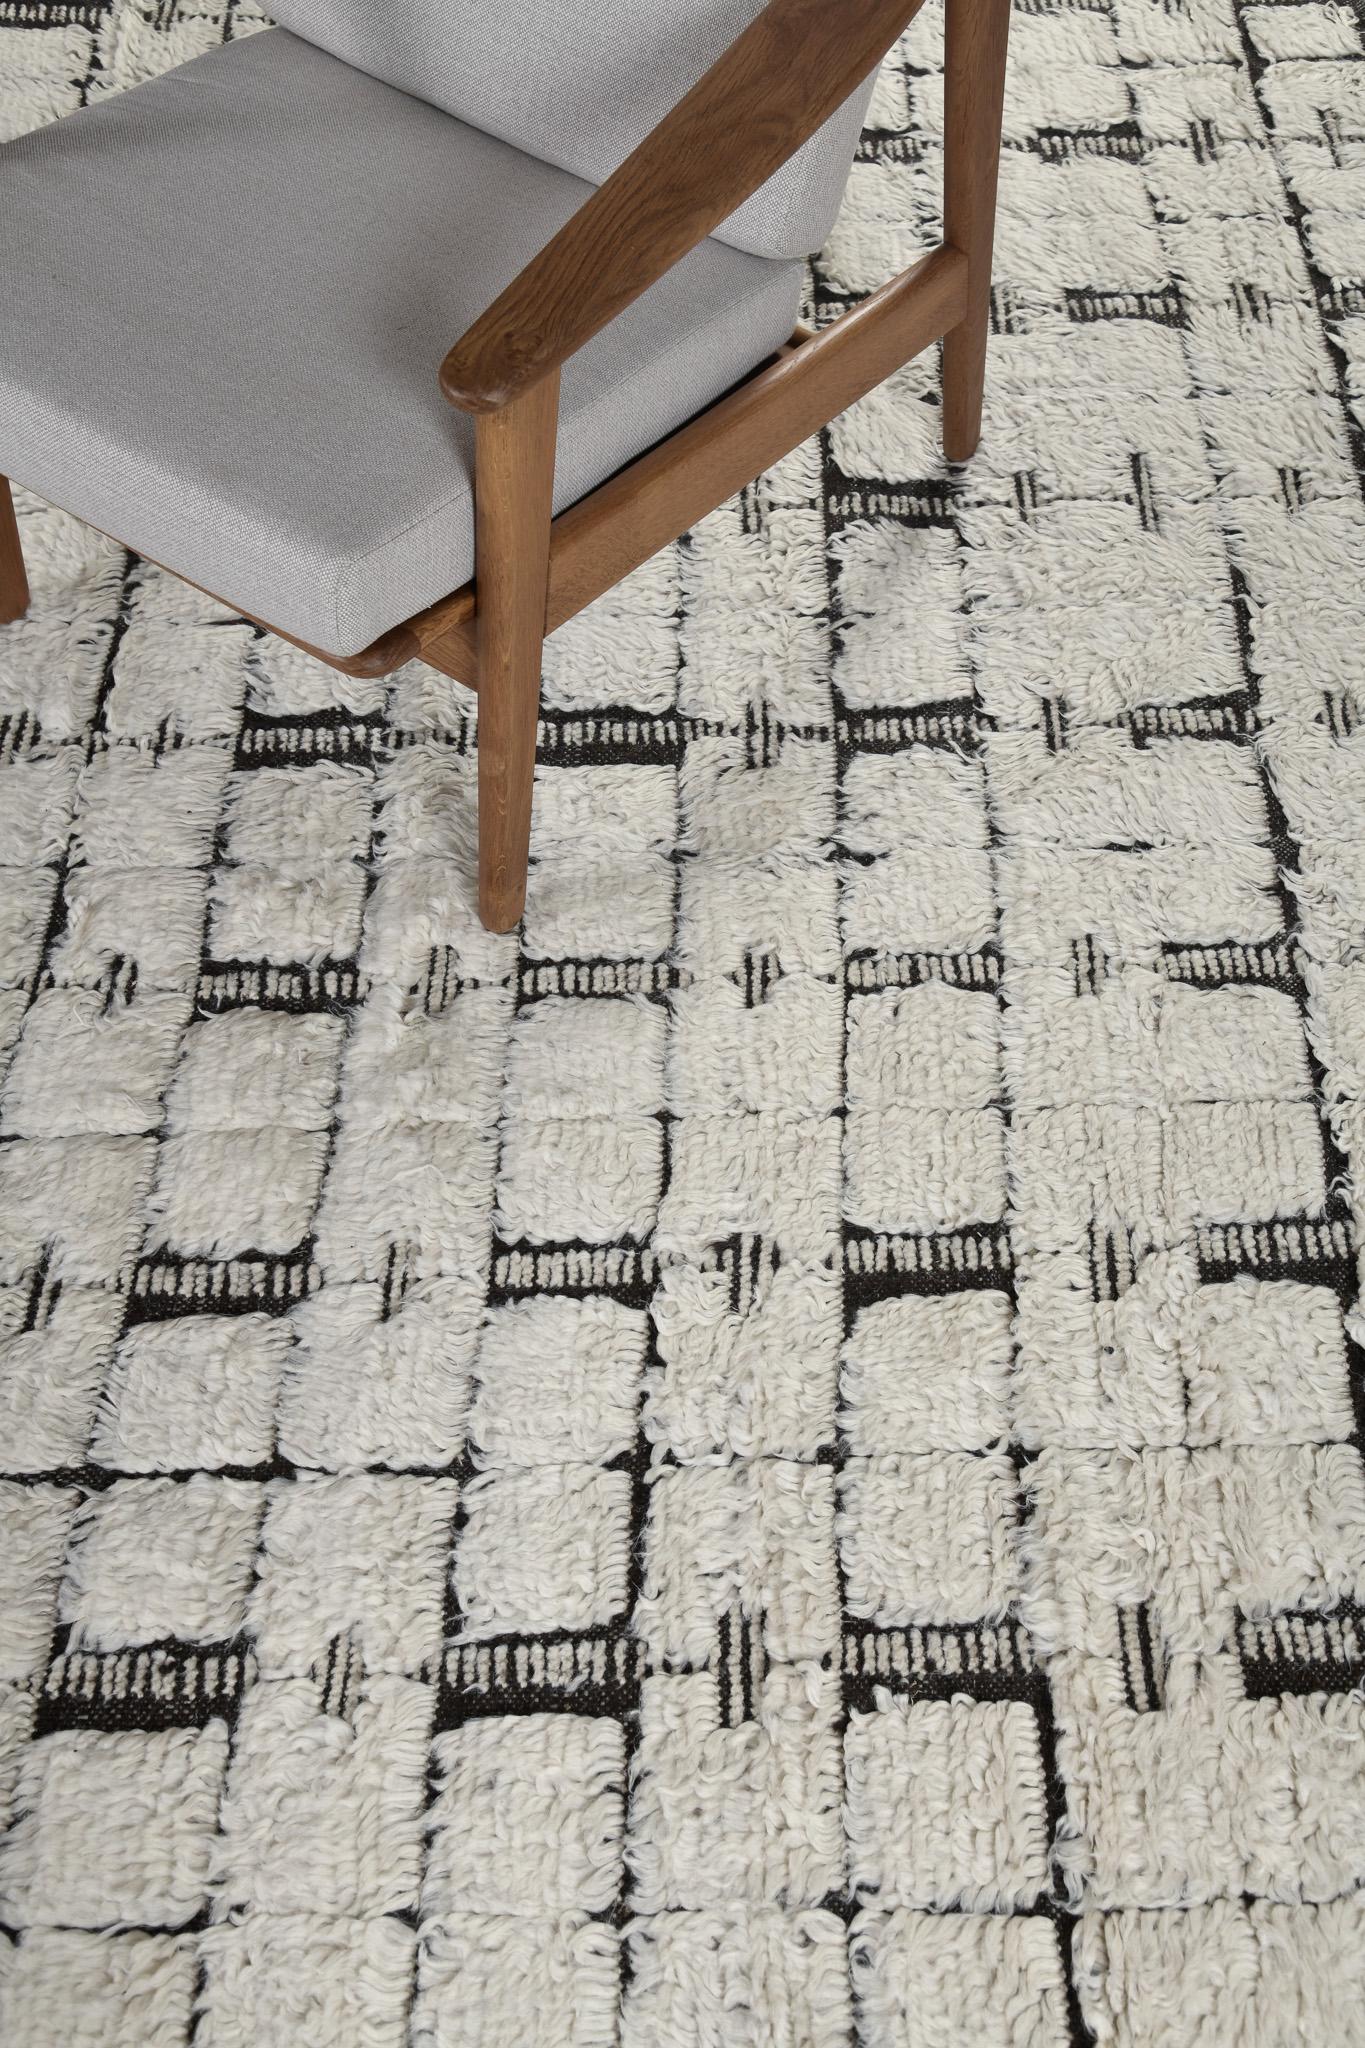 Ibis is one of the finest and stunning detailed pile weave from our Sandpiper collections. The contemporary design in neutral color scheme allows the designer to create a fabulous interior that leaves your guests gazing in awe of this noteworthy